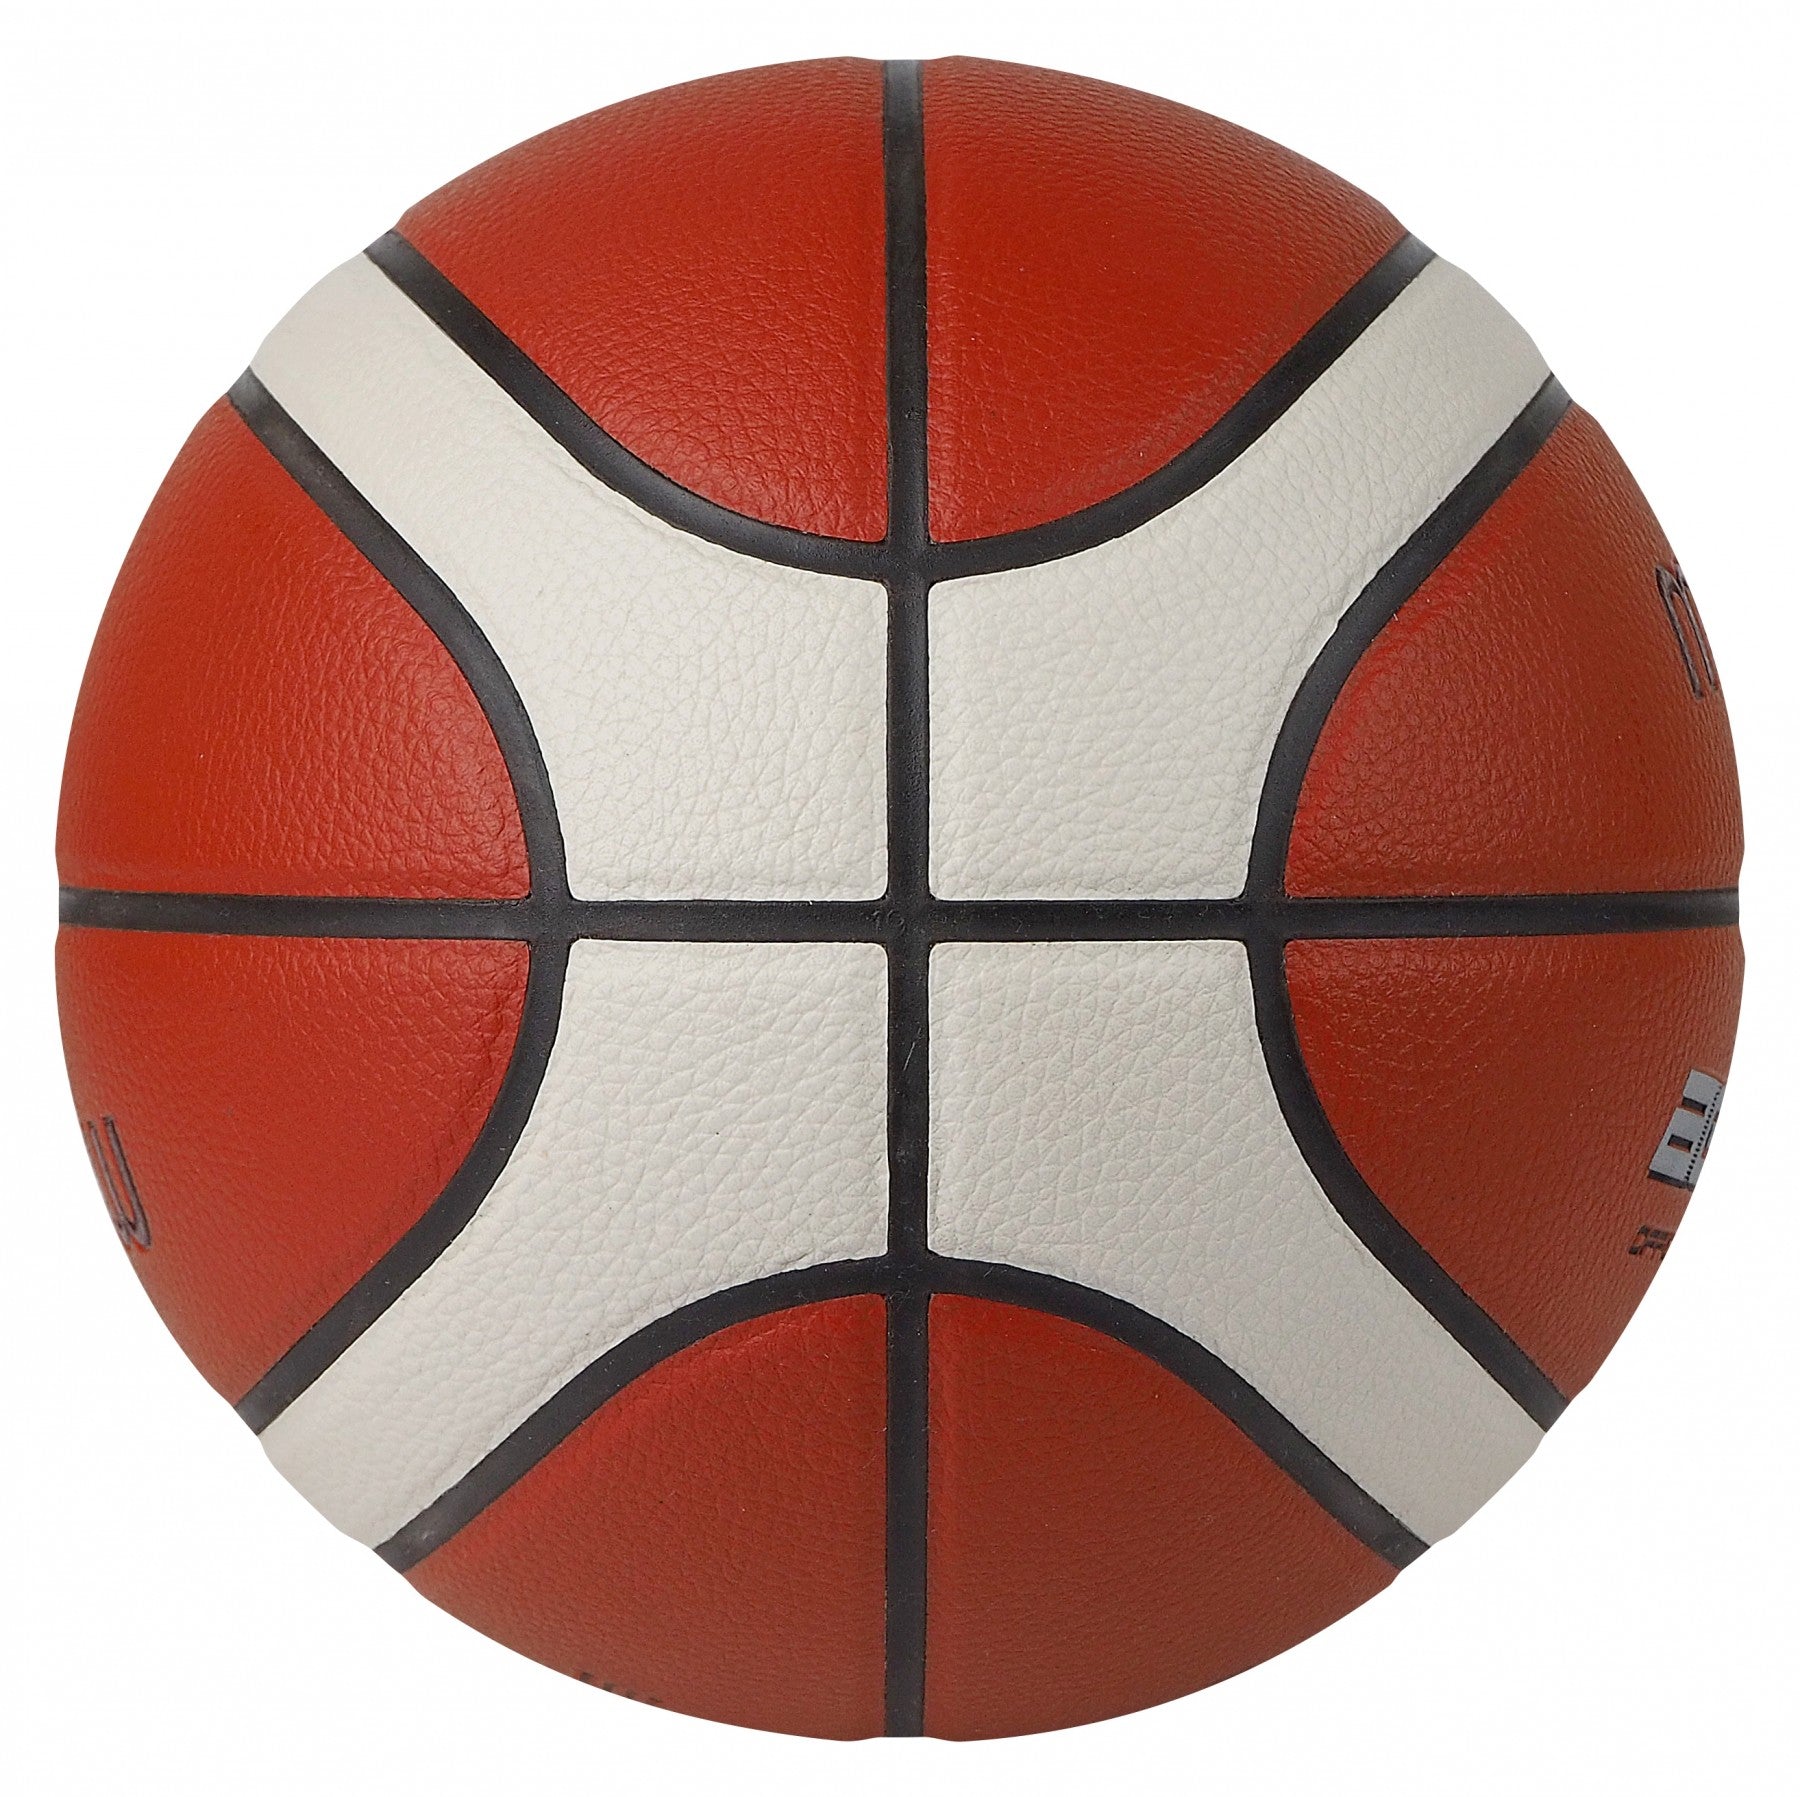 Molten 12 Panel Synthetic Leather Basketball Indoor/Outdoor - Tan/Cream